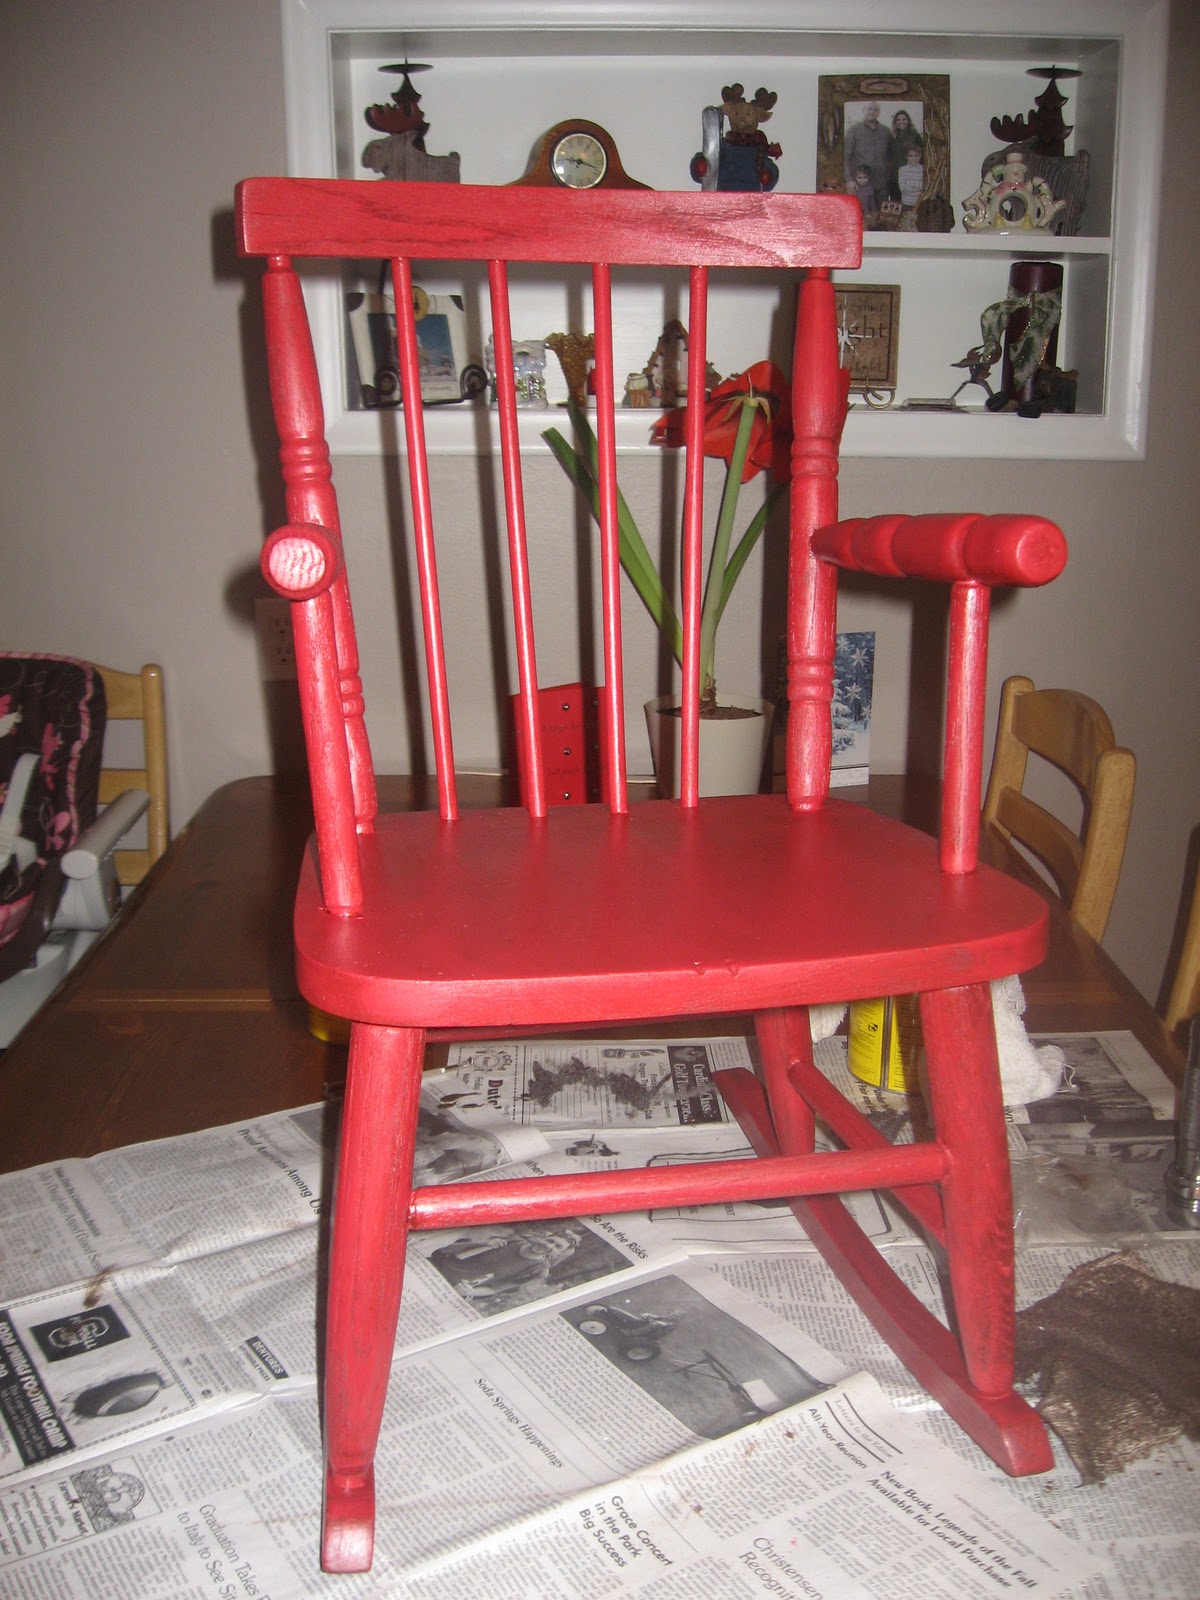 Rural Grace: The Little Red Rocking Chair